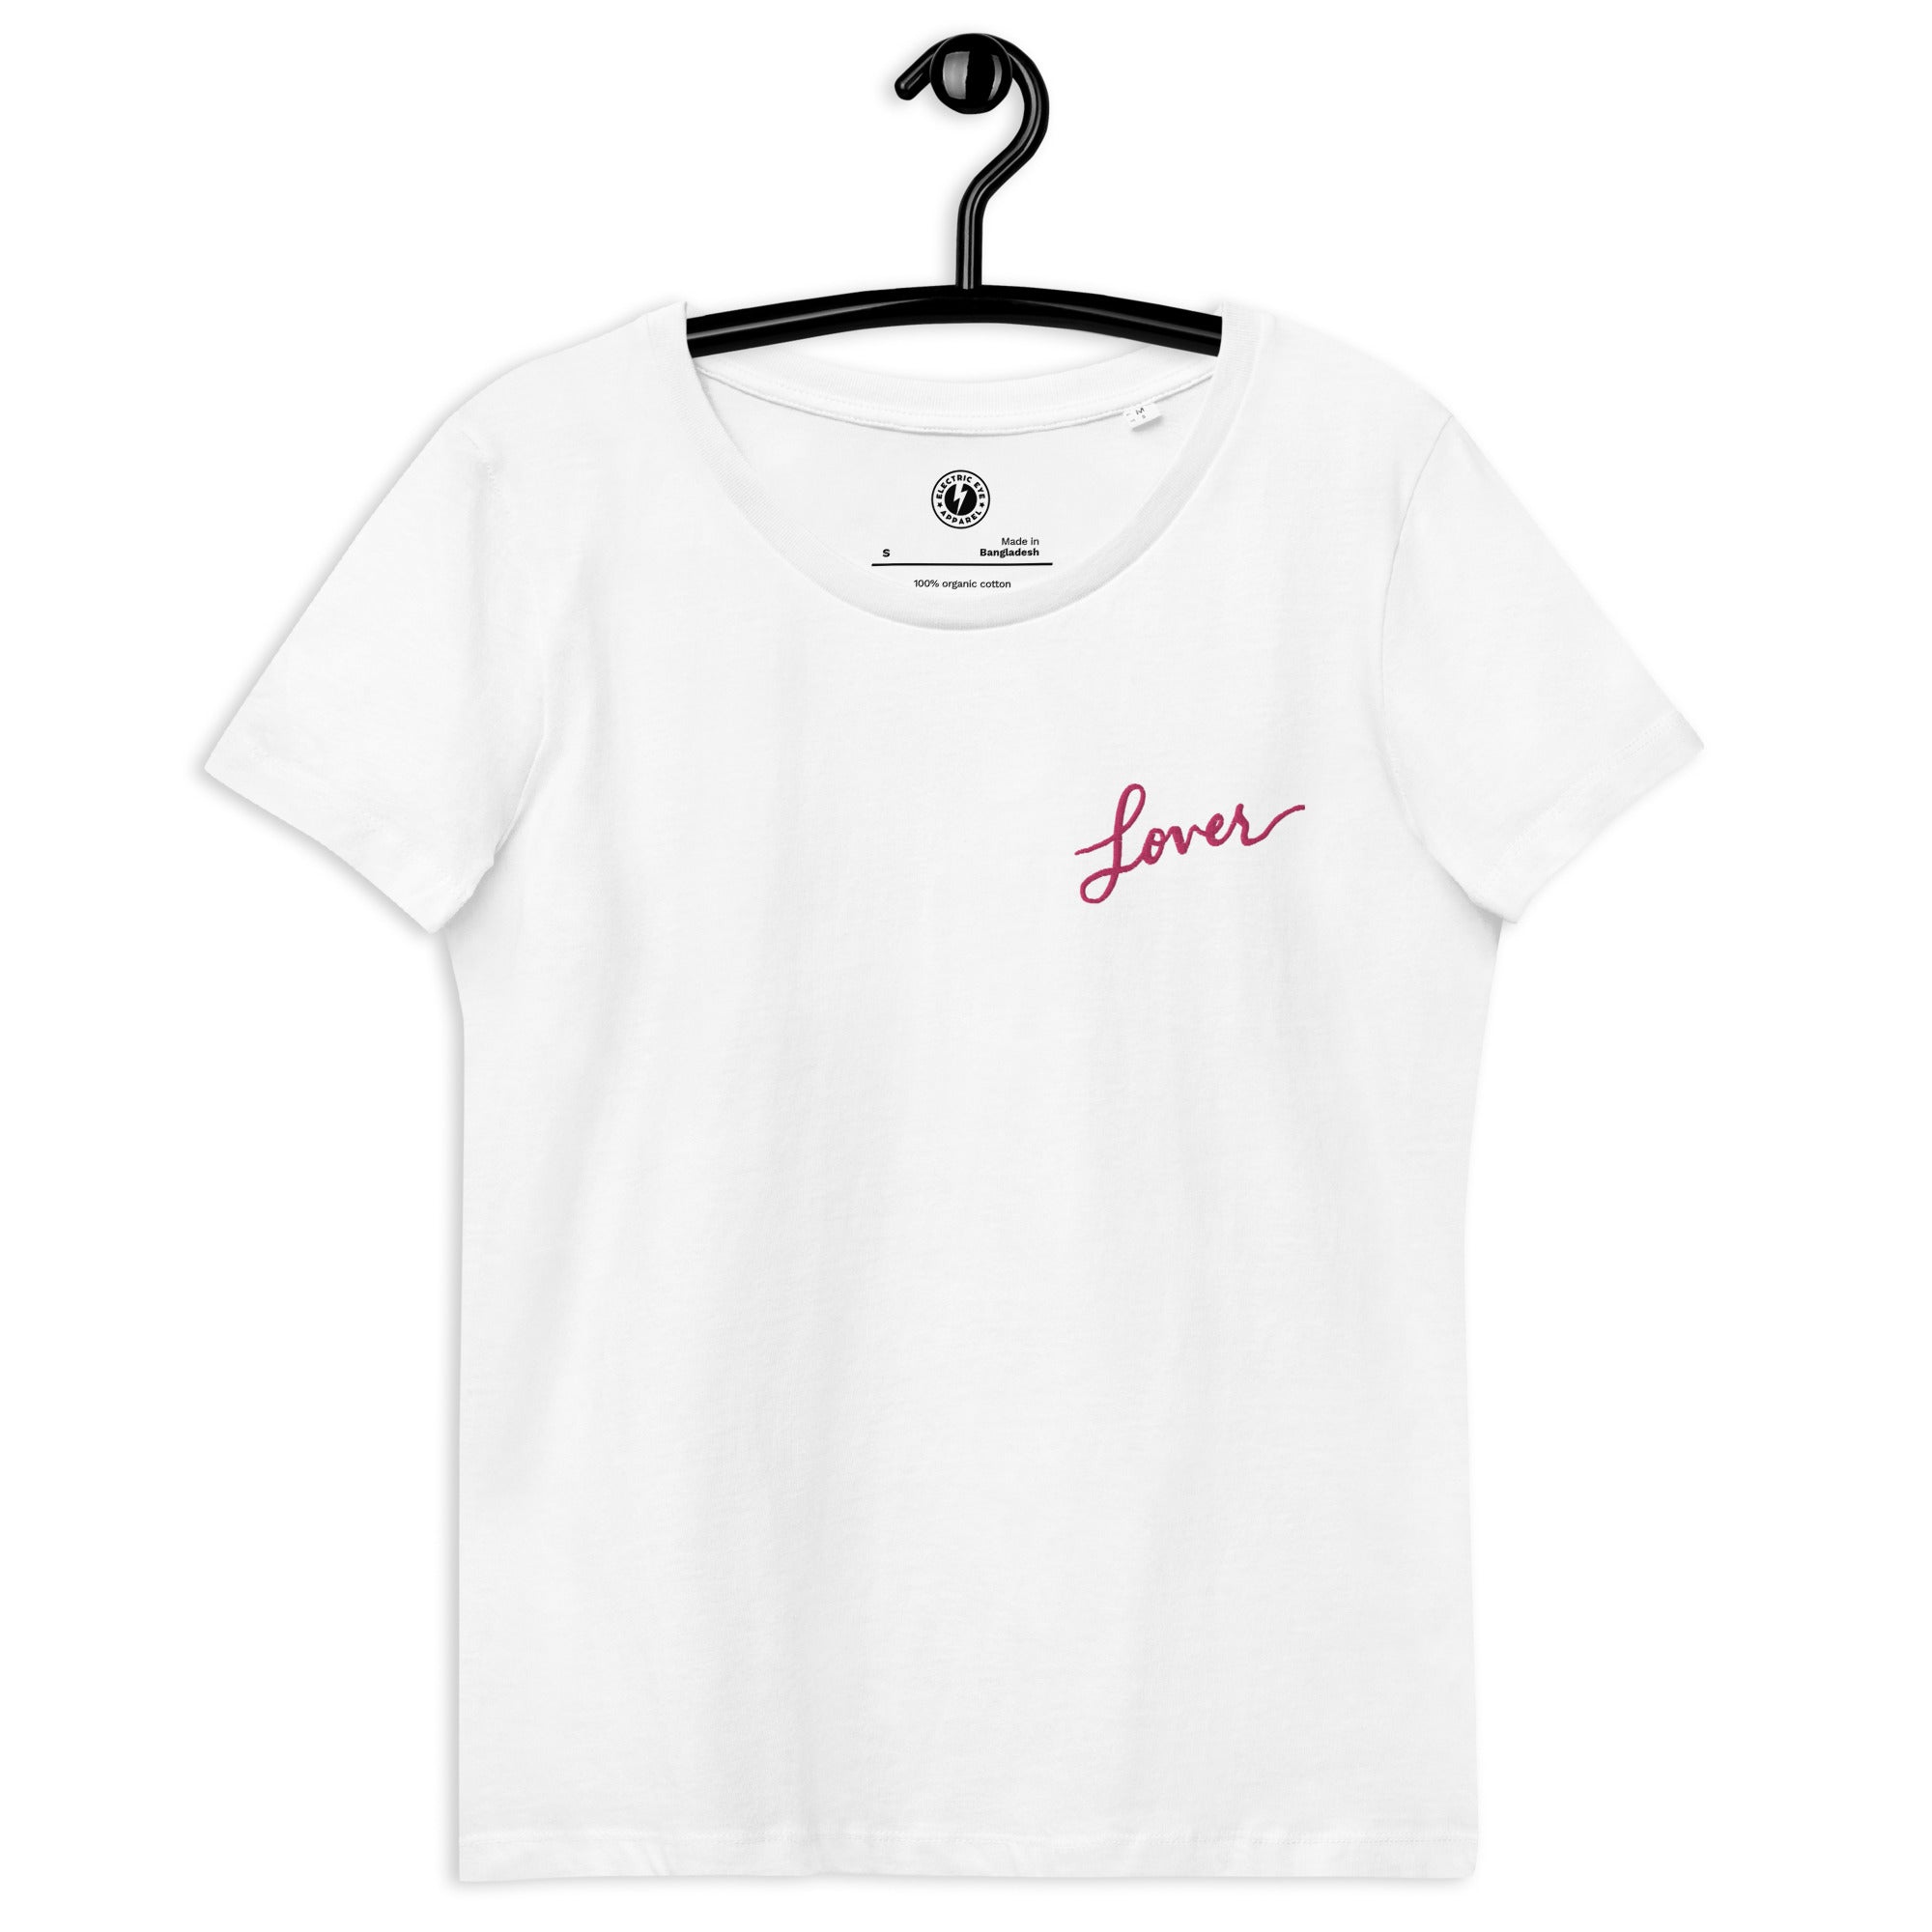 'Lover' Embroidered Women's Fitted Organic Swift T-shirt - Pink Thread